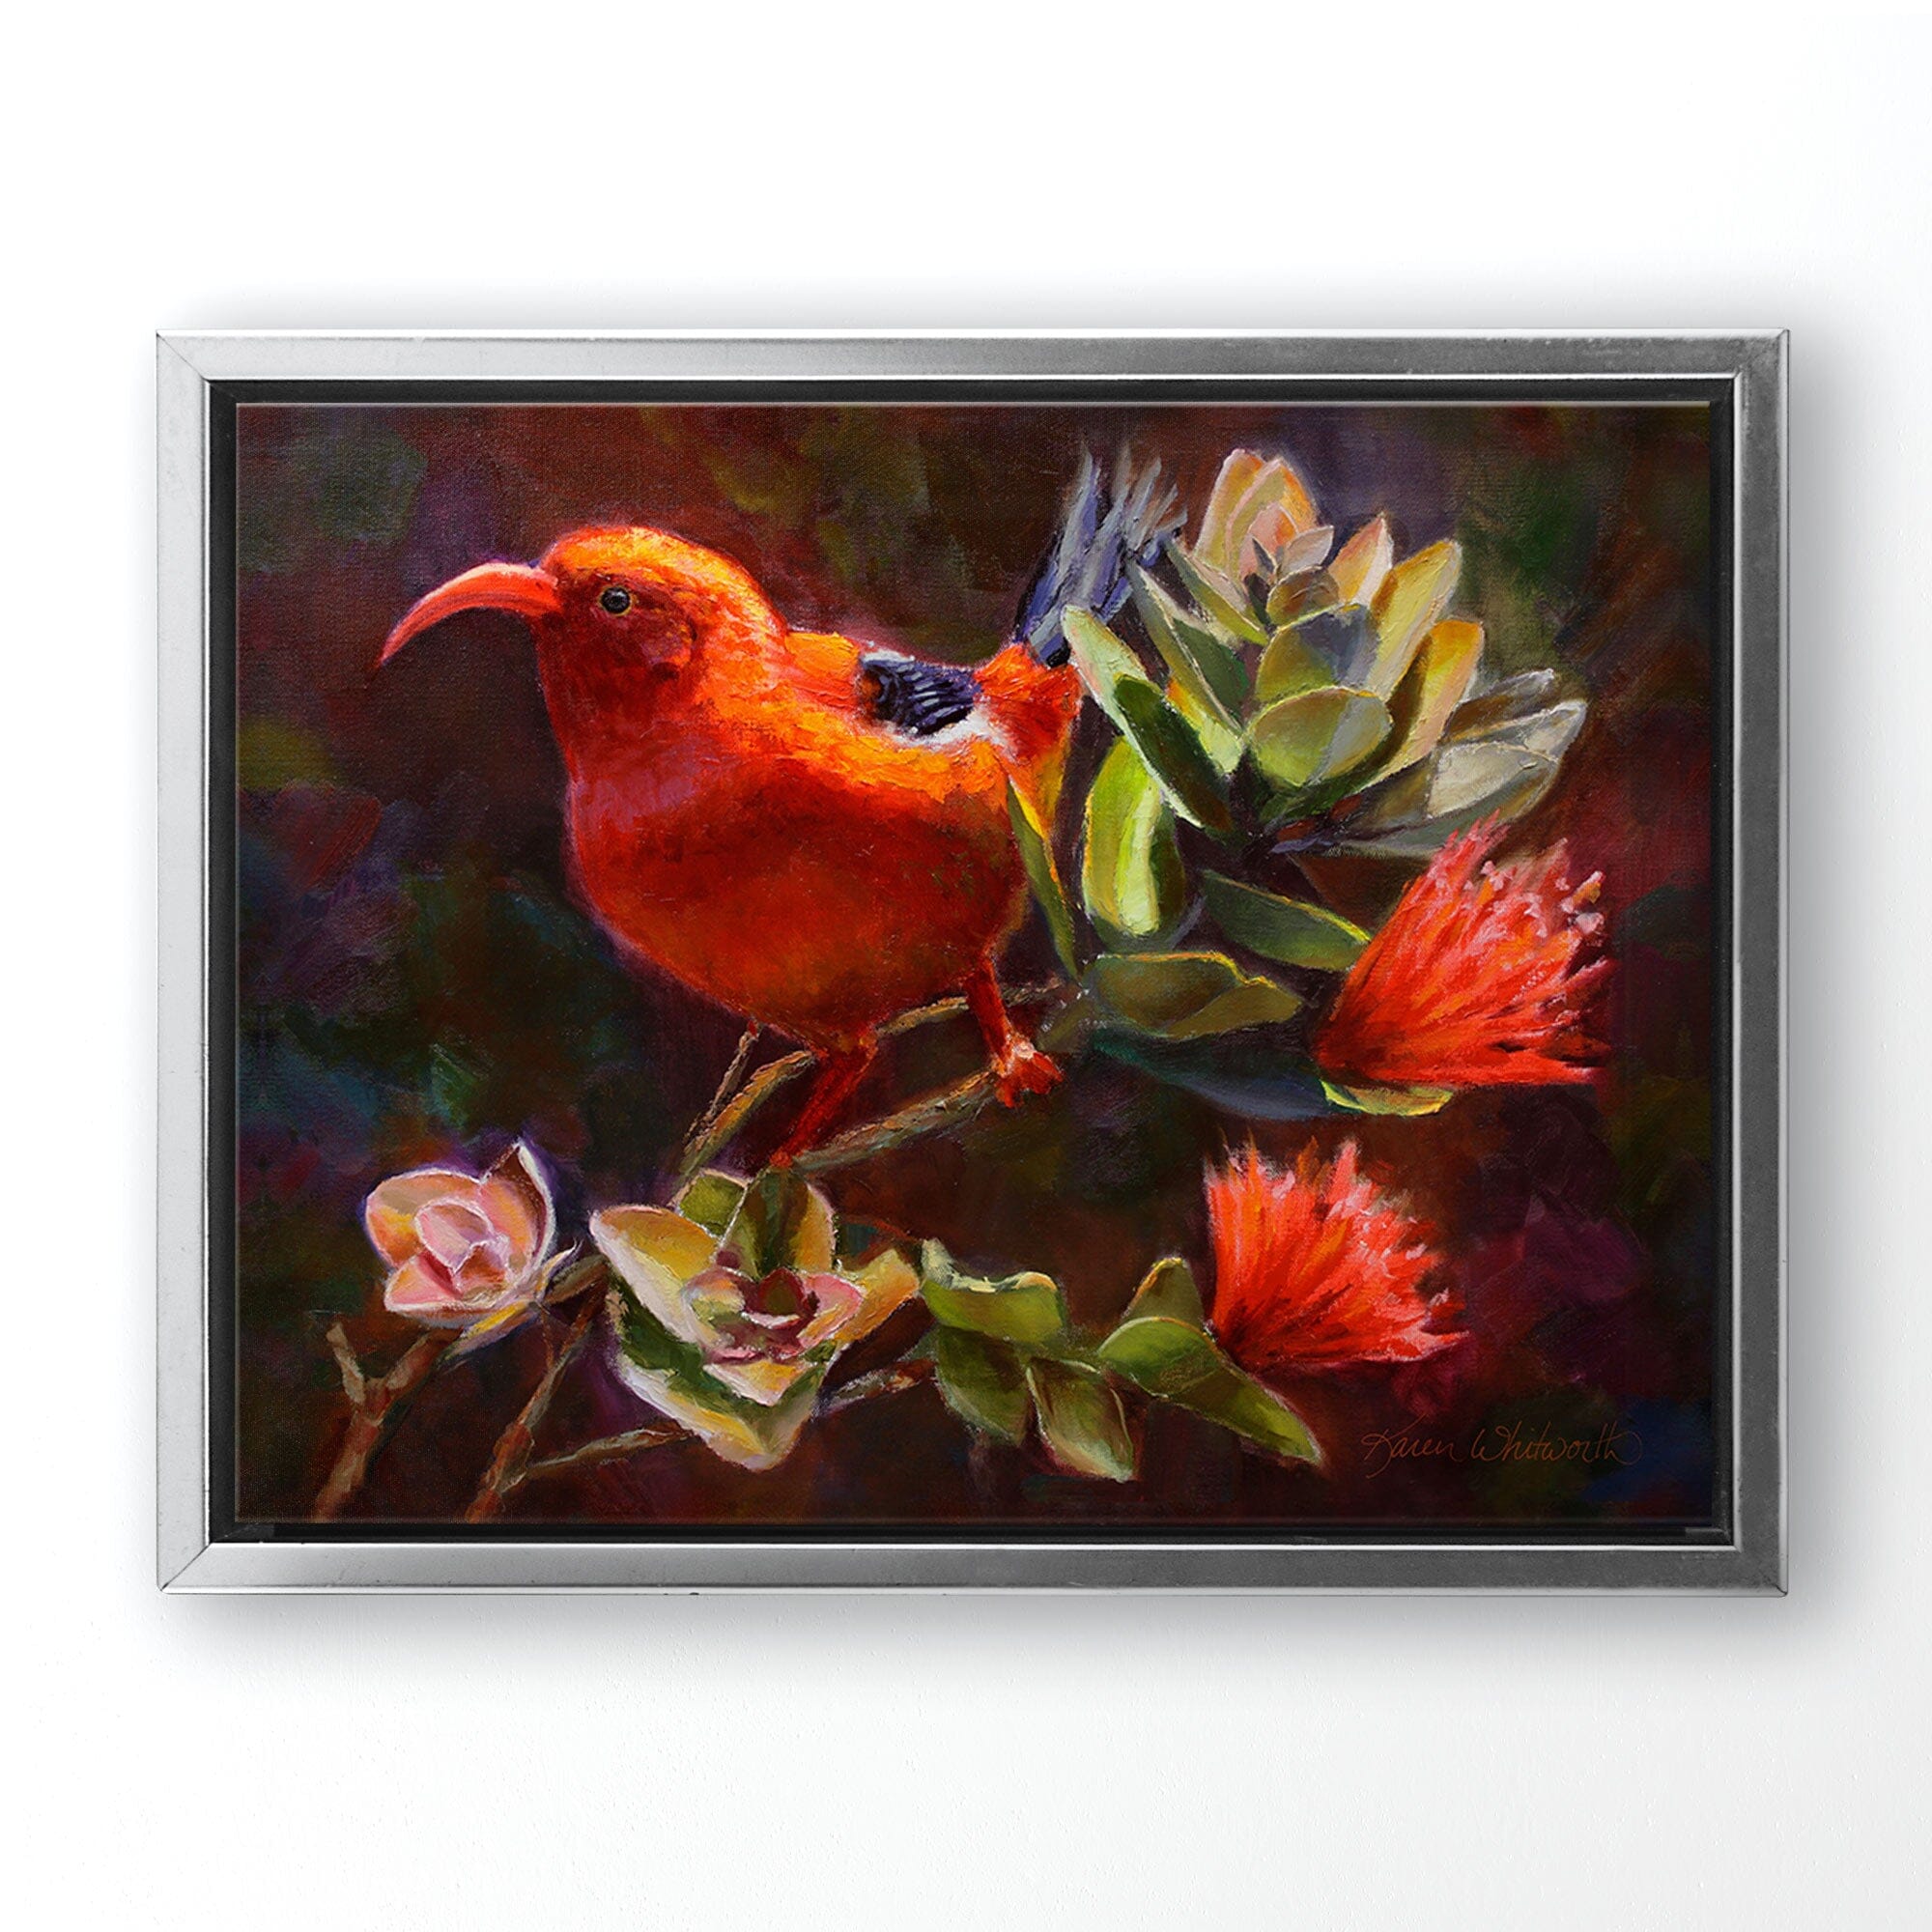 Hawaiian canvas art flower painting of ohia tree and iiwi bird by Hawaii artist Karen Whitworth. The artwork is in a silver frame and is hanging on a white wall. 